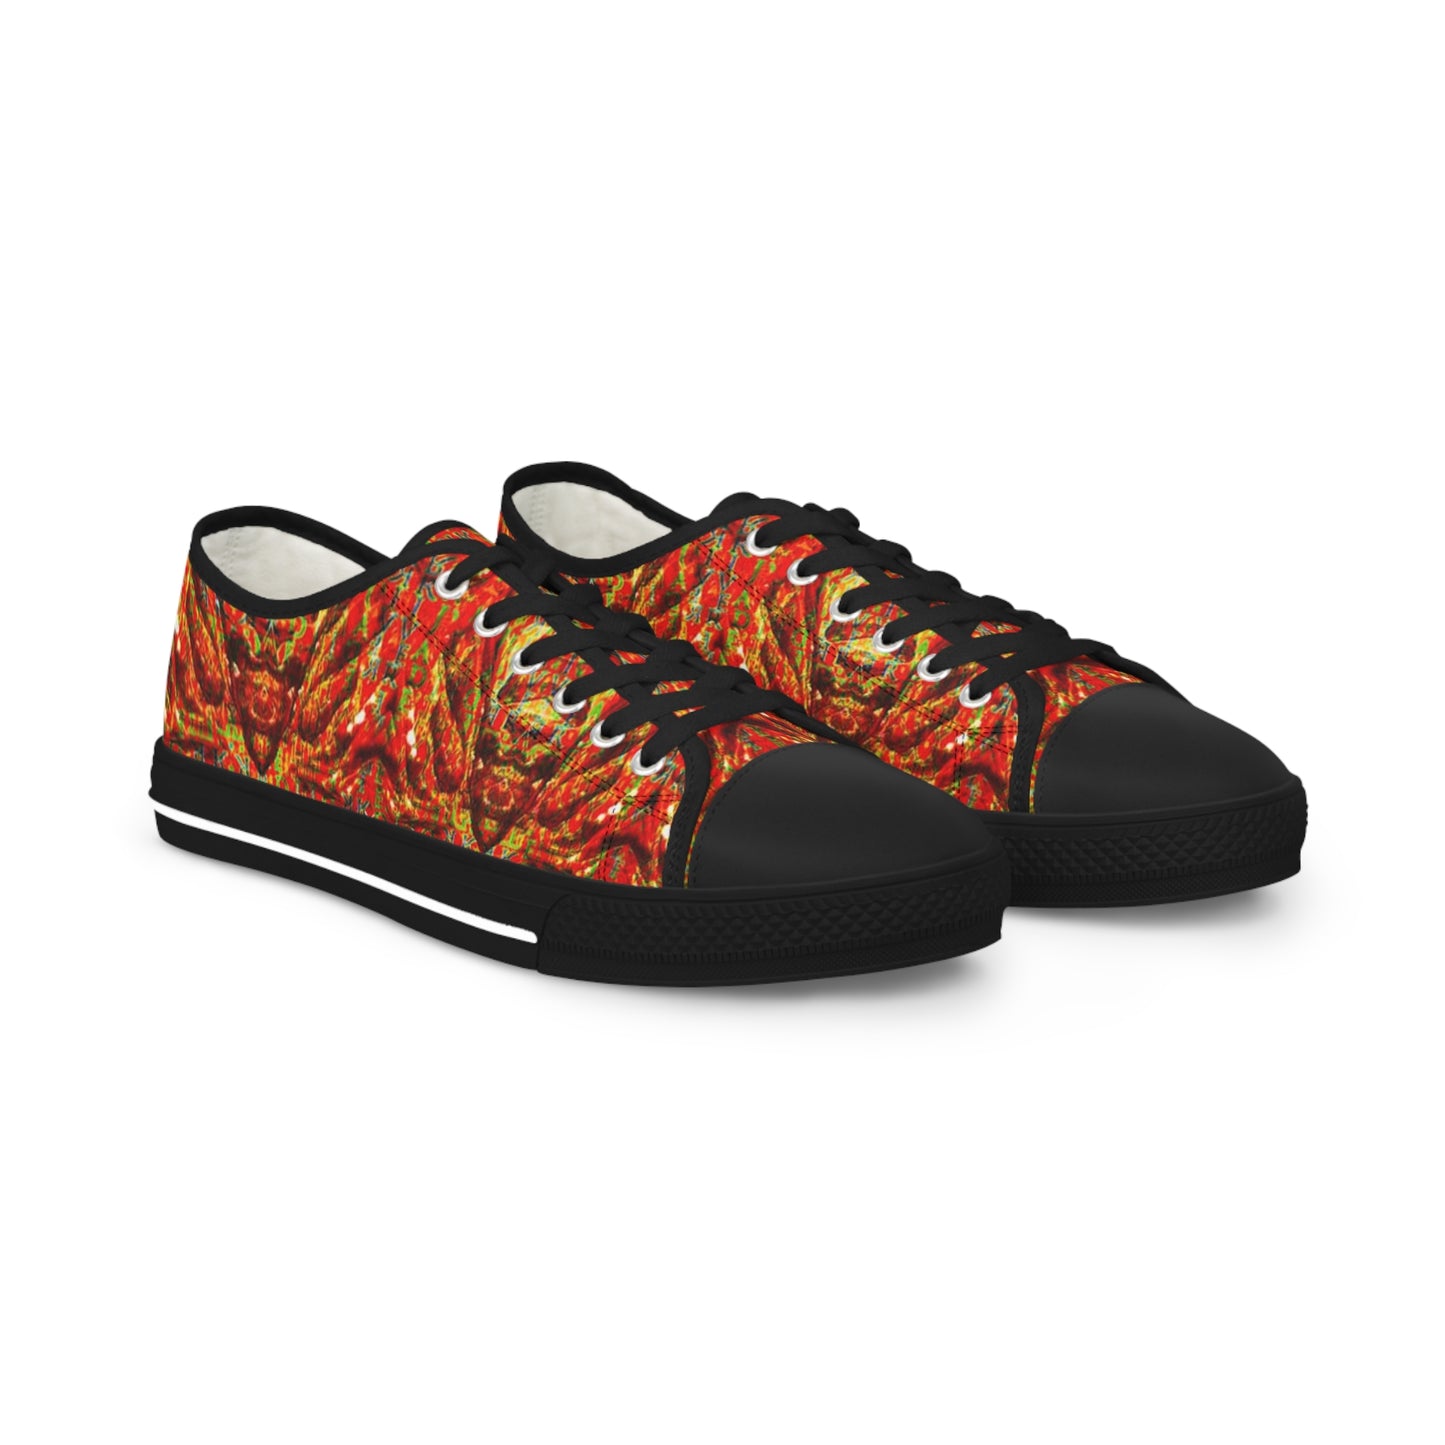 Low Top Sneakers (His/They)(Samhain Dream Thaw 15 & Orange Logo@Alchemic) RJSTHs2023 RJS